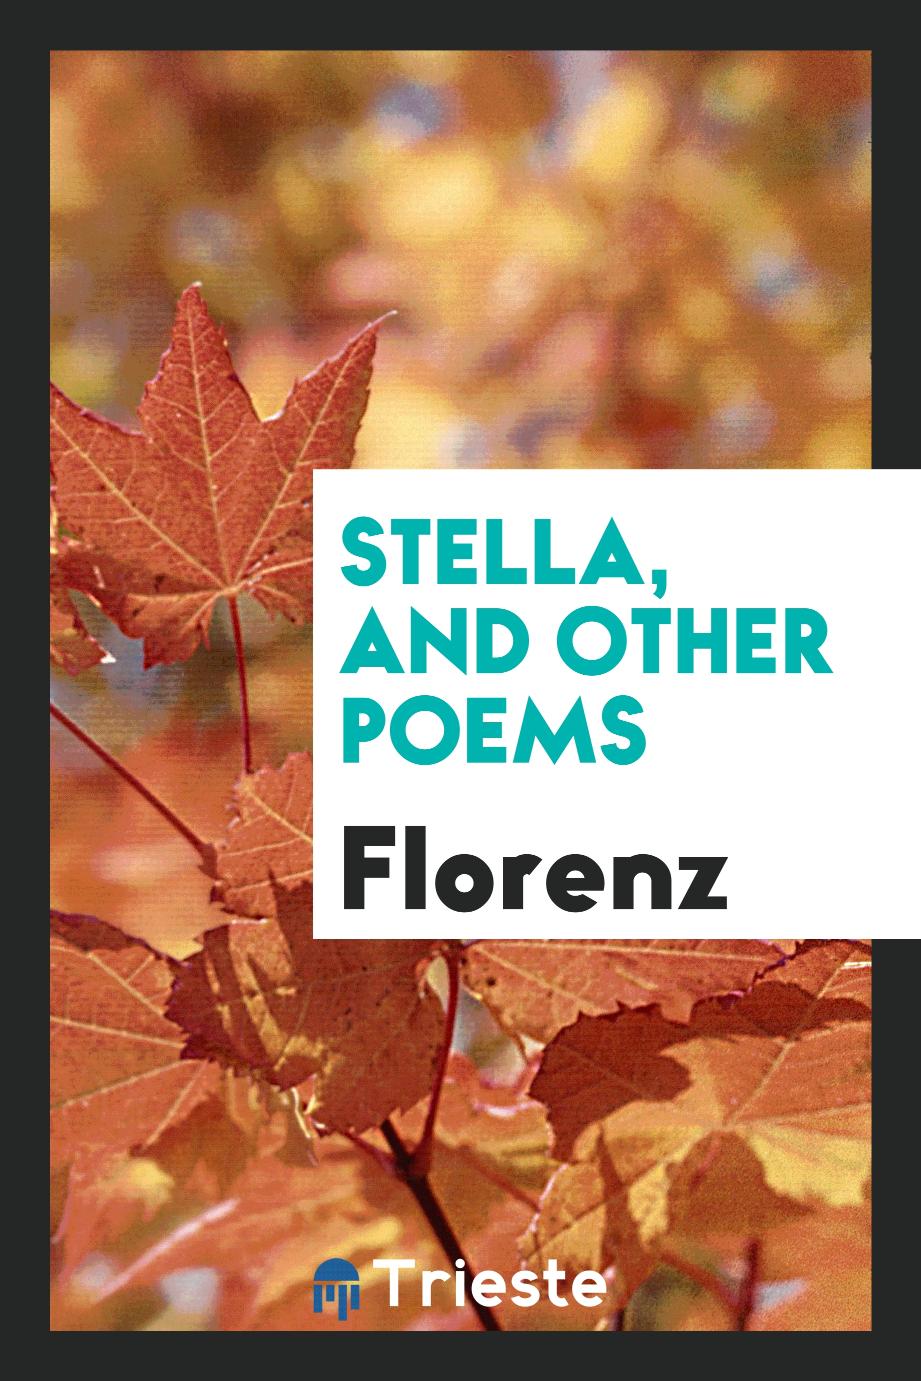 Stella, and Other Poems